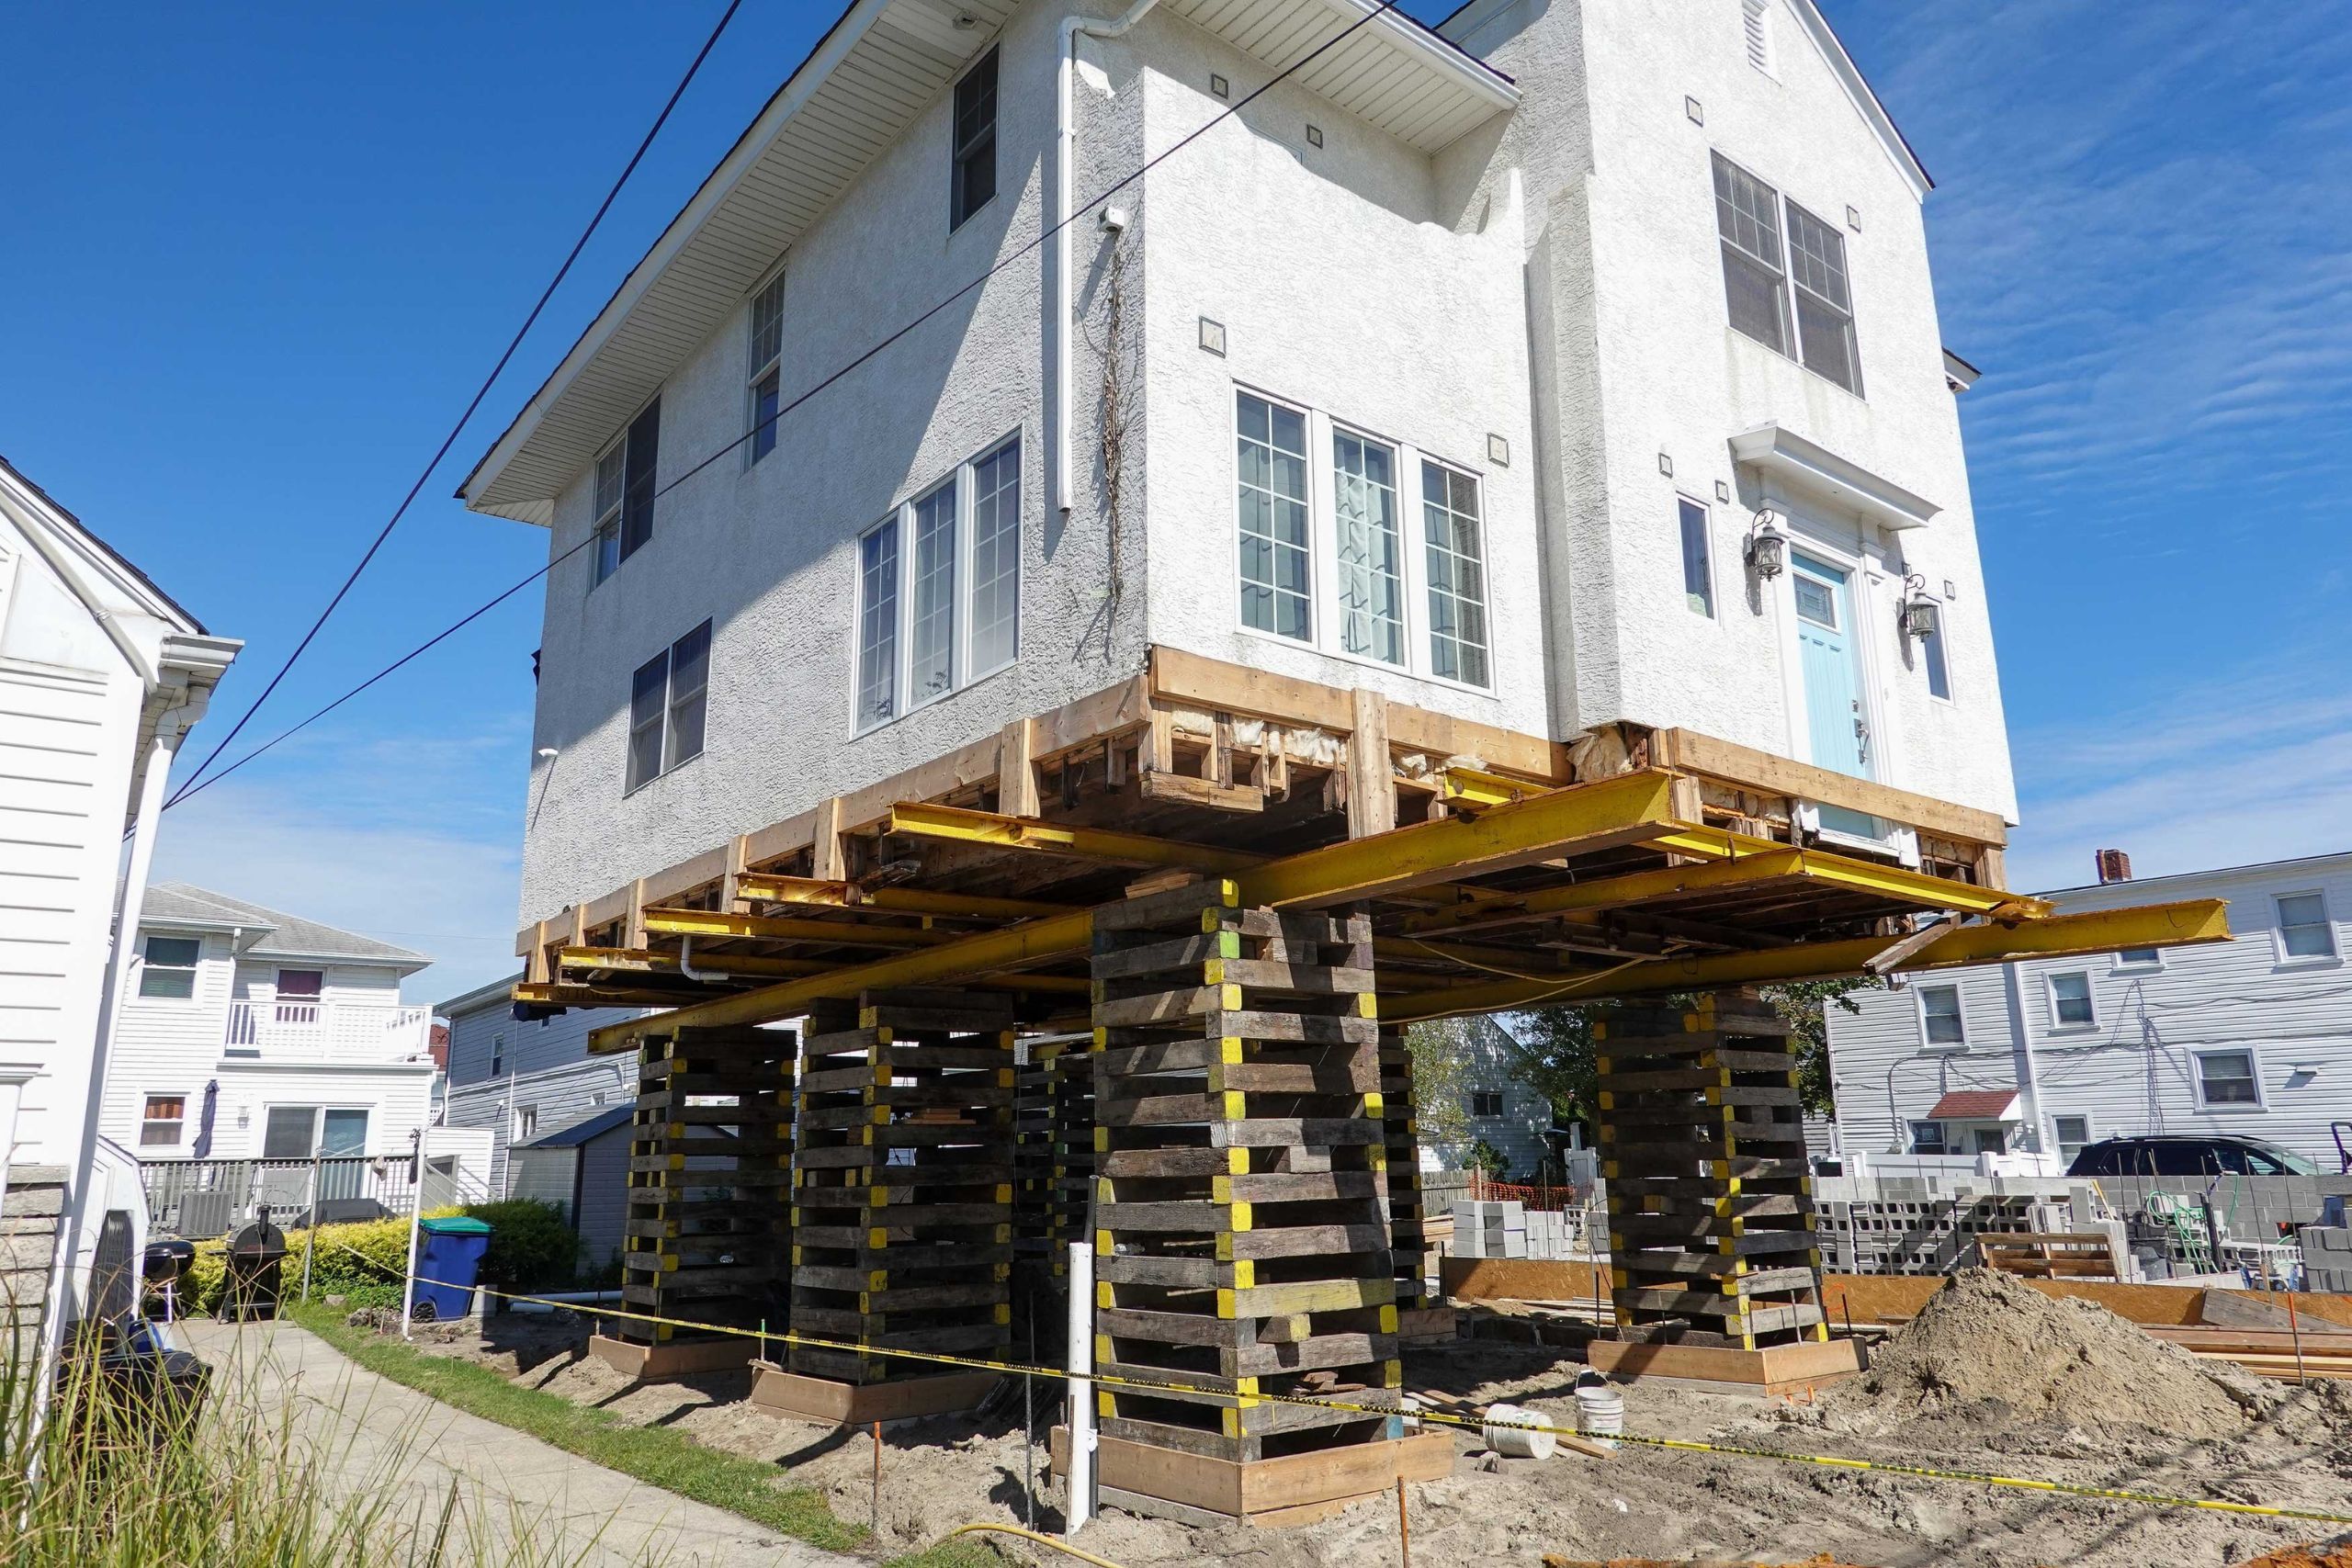 A team of professionals using specialized equipment to raise a house in Fort Myers, preparing it for elevation and renovation